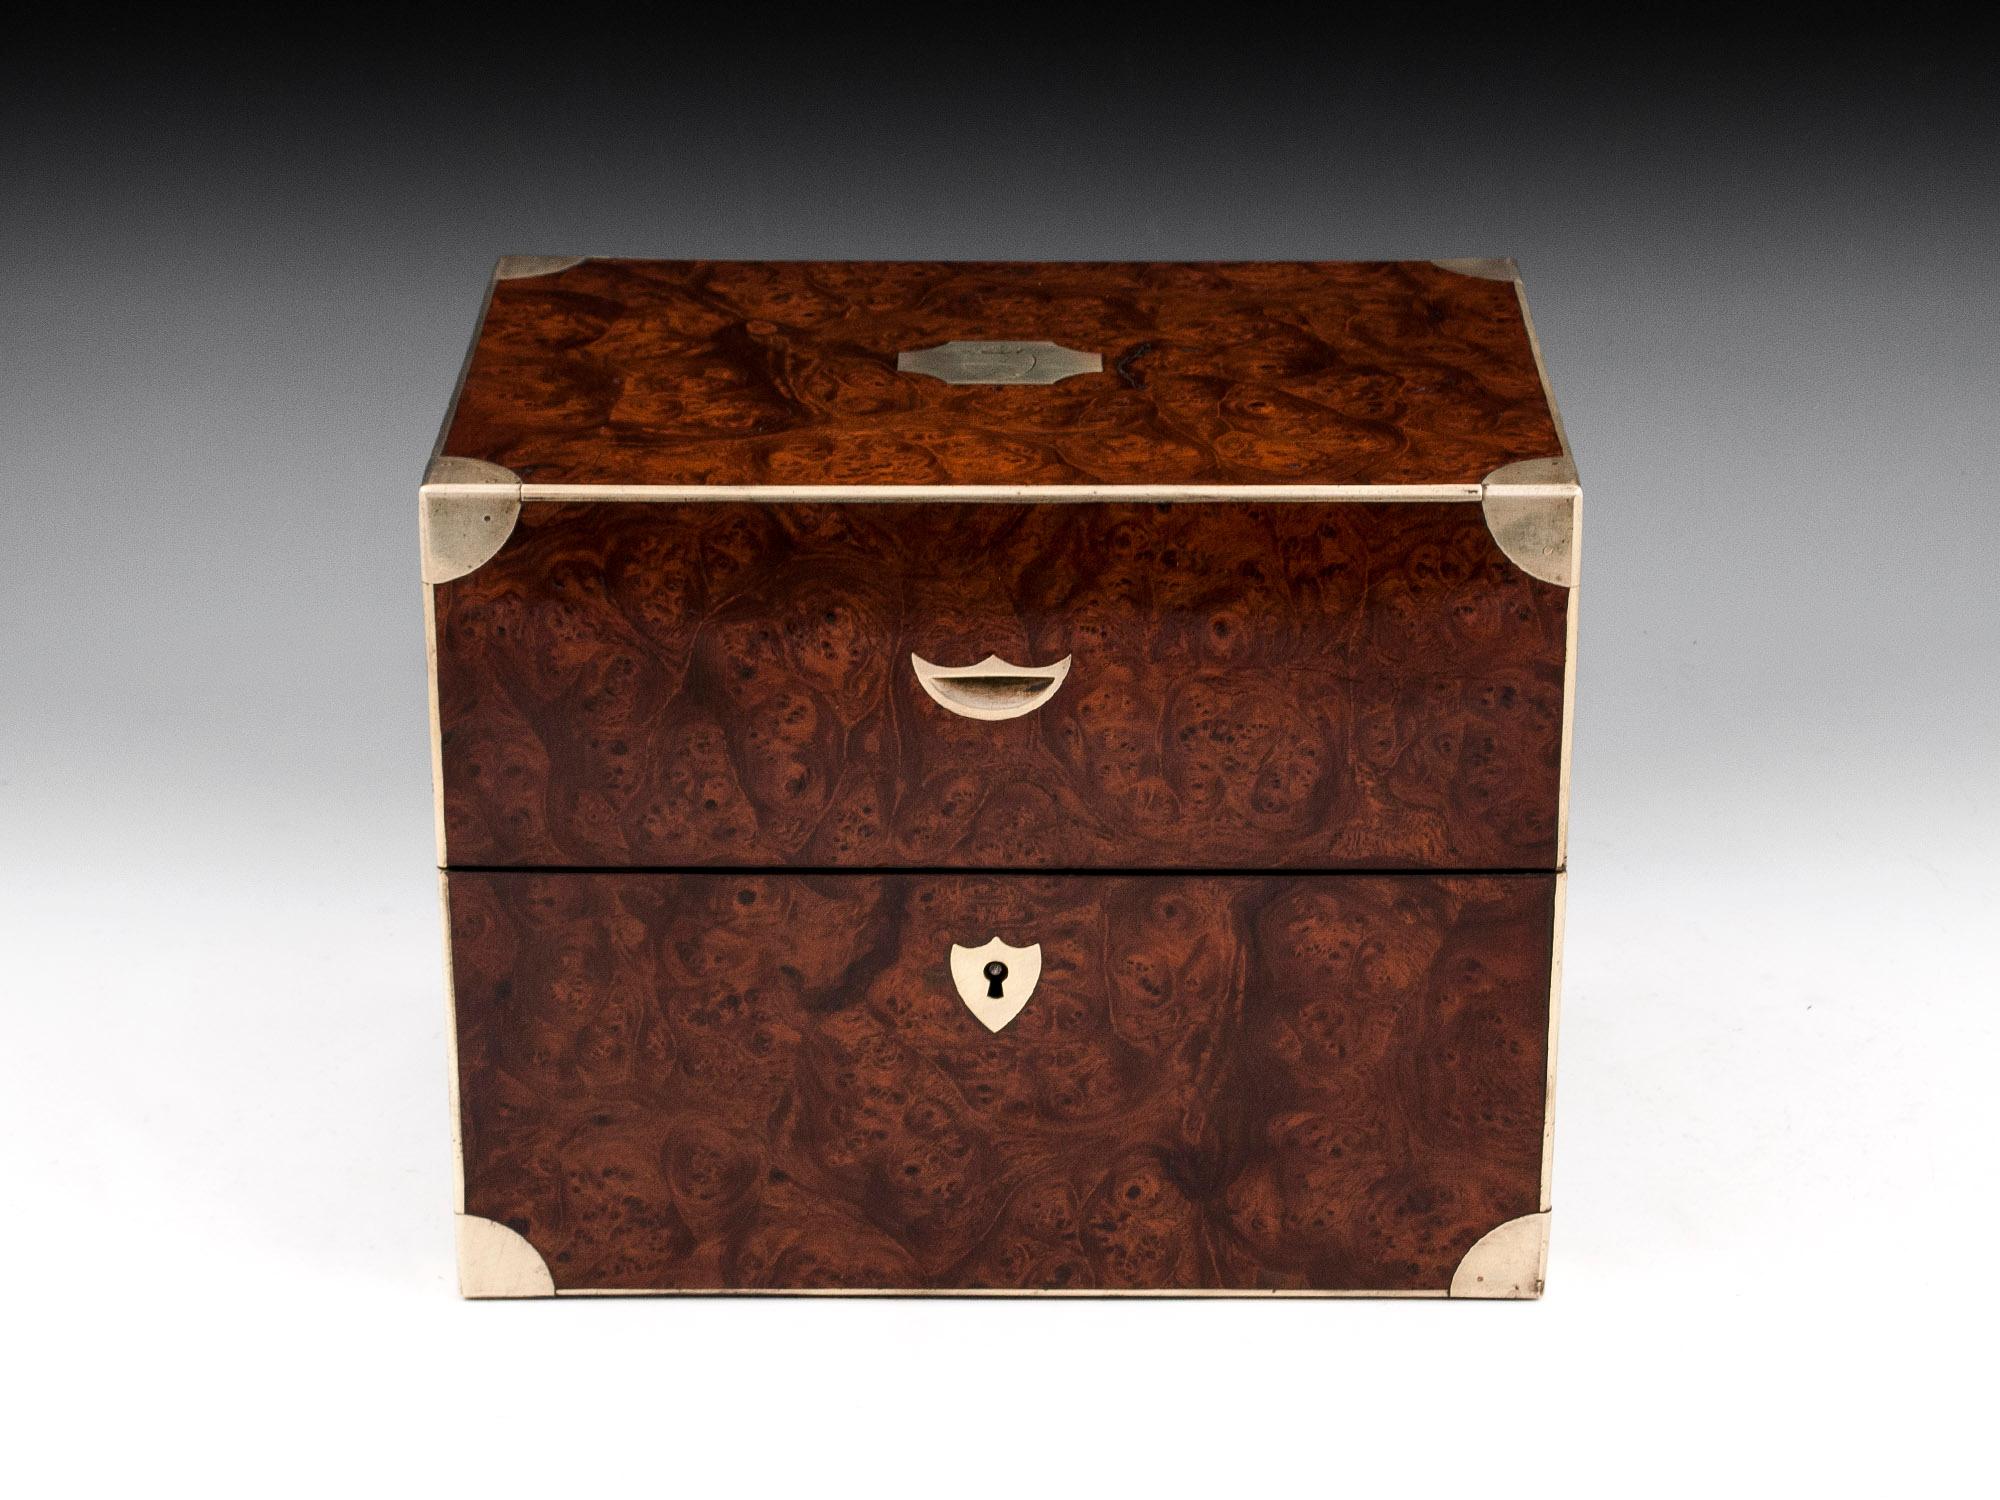 Antique jewelry box veneered in stunning burr elm with brass edging, engraved initial plate, finger tab and shield shaped escutcheon. With flush brass carry handles on each side. The engraved initial plate is adorned with a coat of arms. 

The